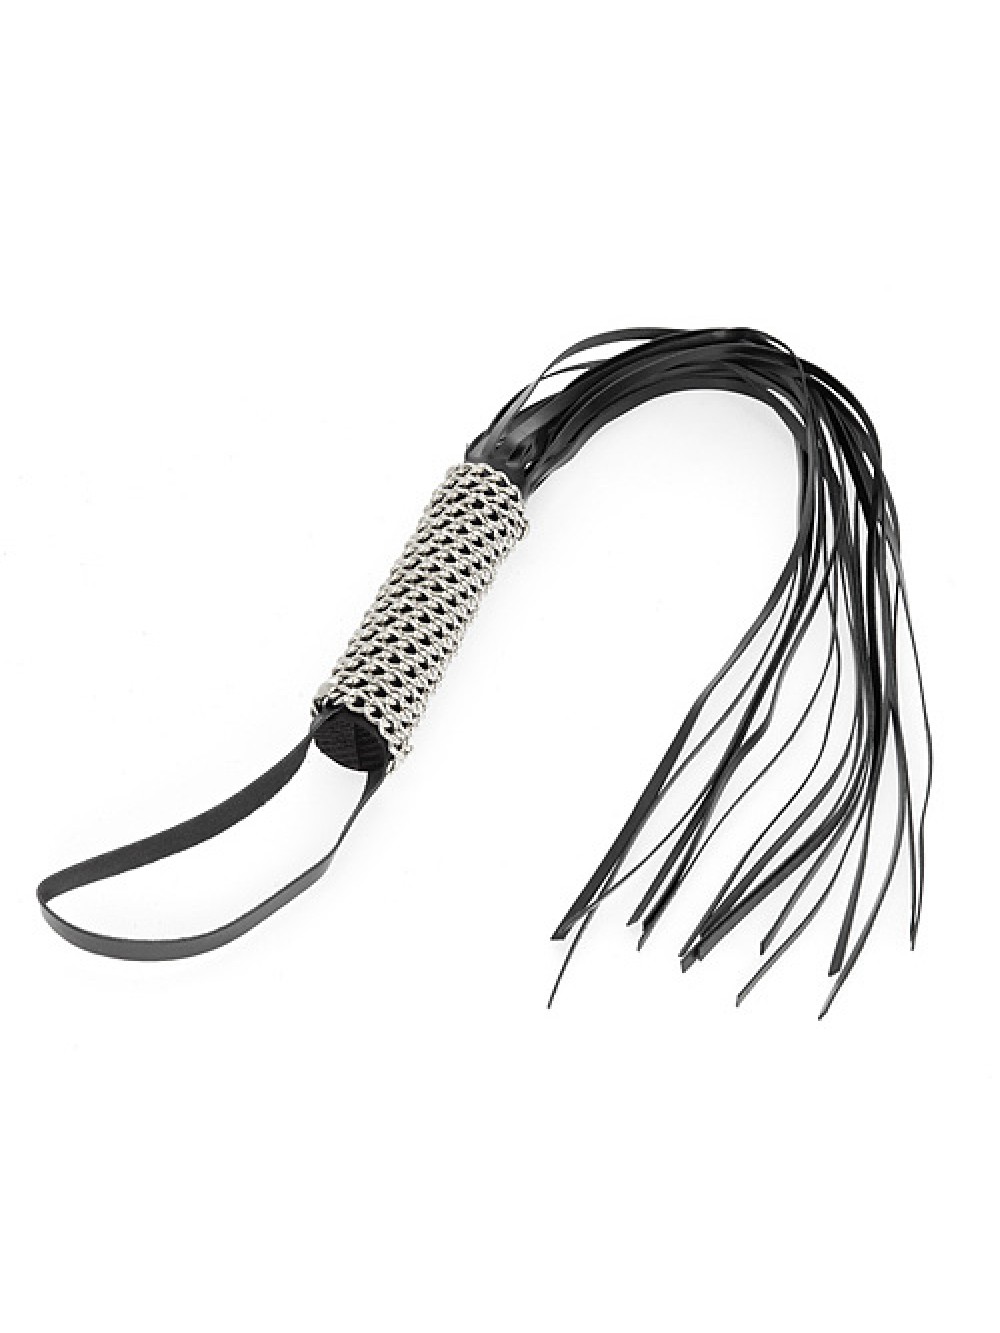 Leather and Chain Whip 8718924230664